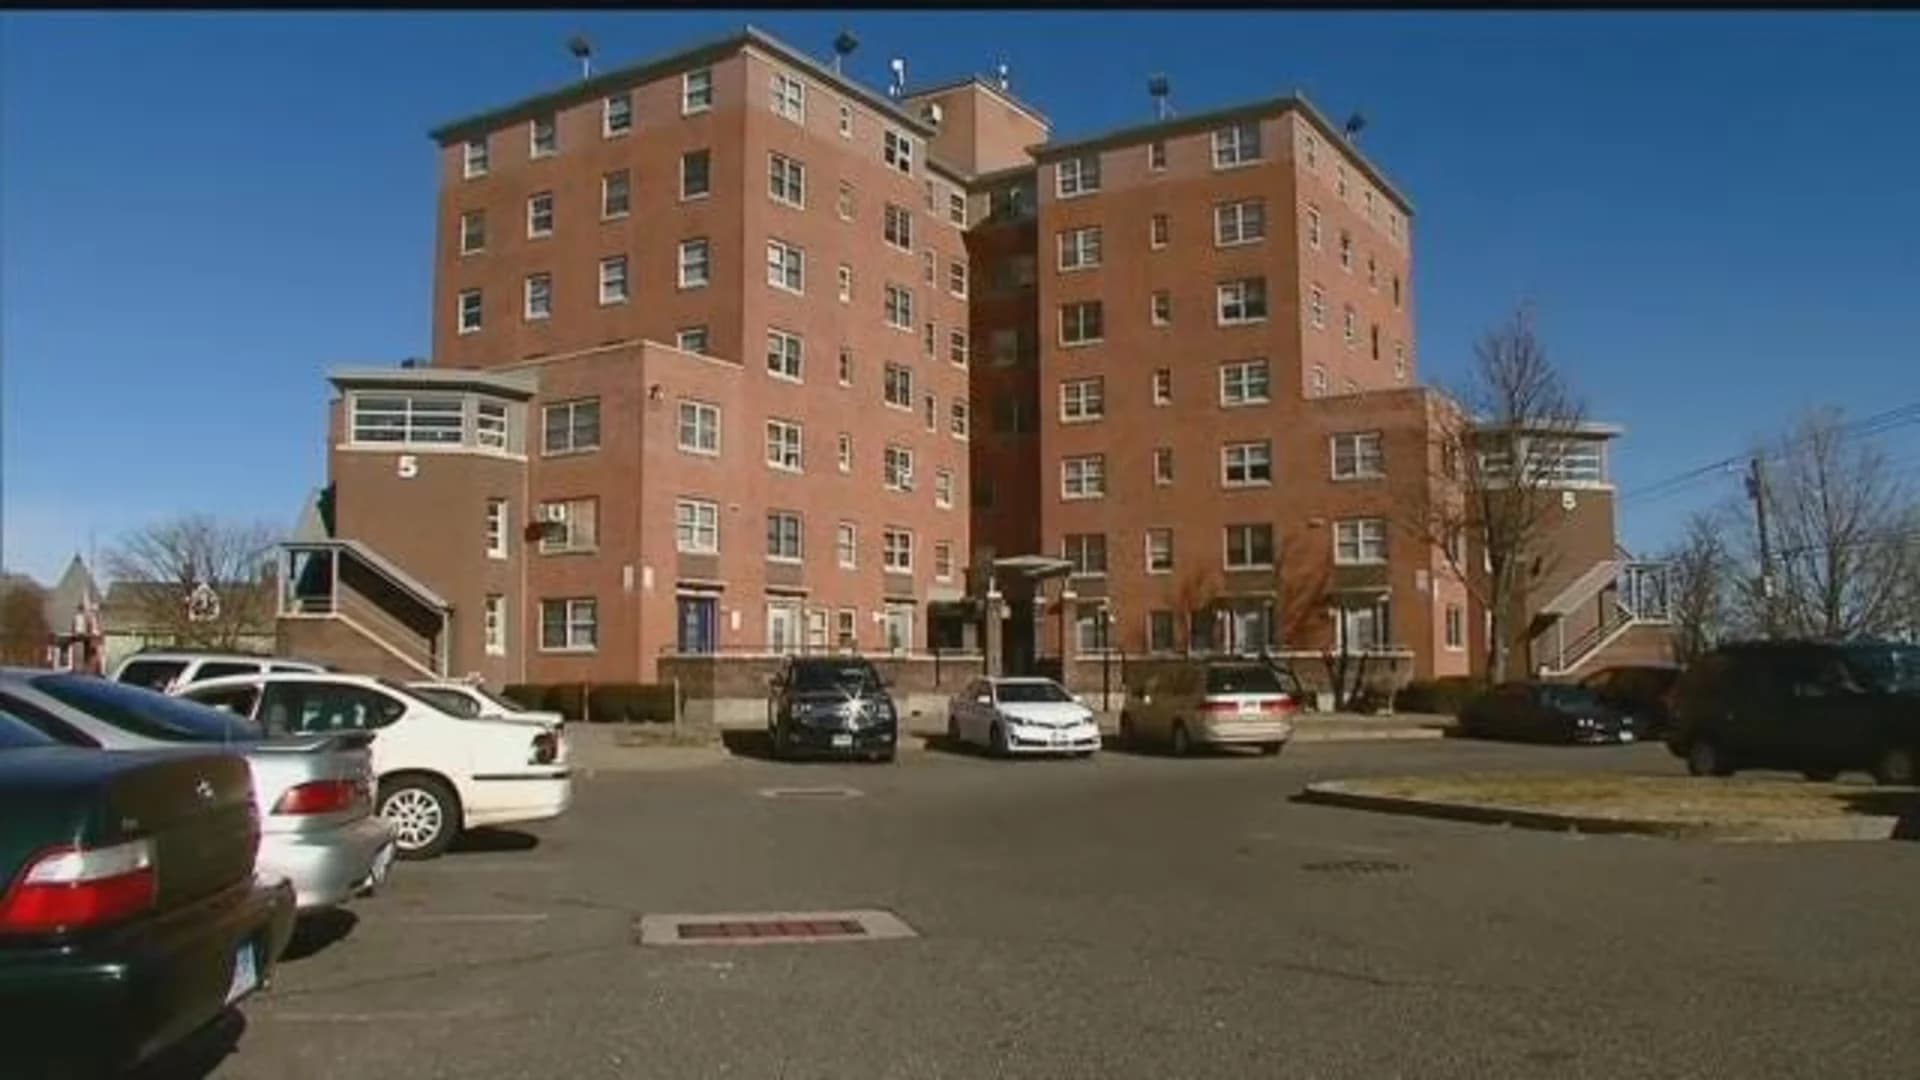 Disabled residents: Broken elevator left them trapped in Bridgeport apartments